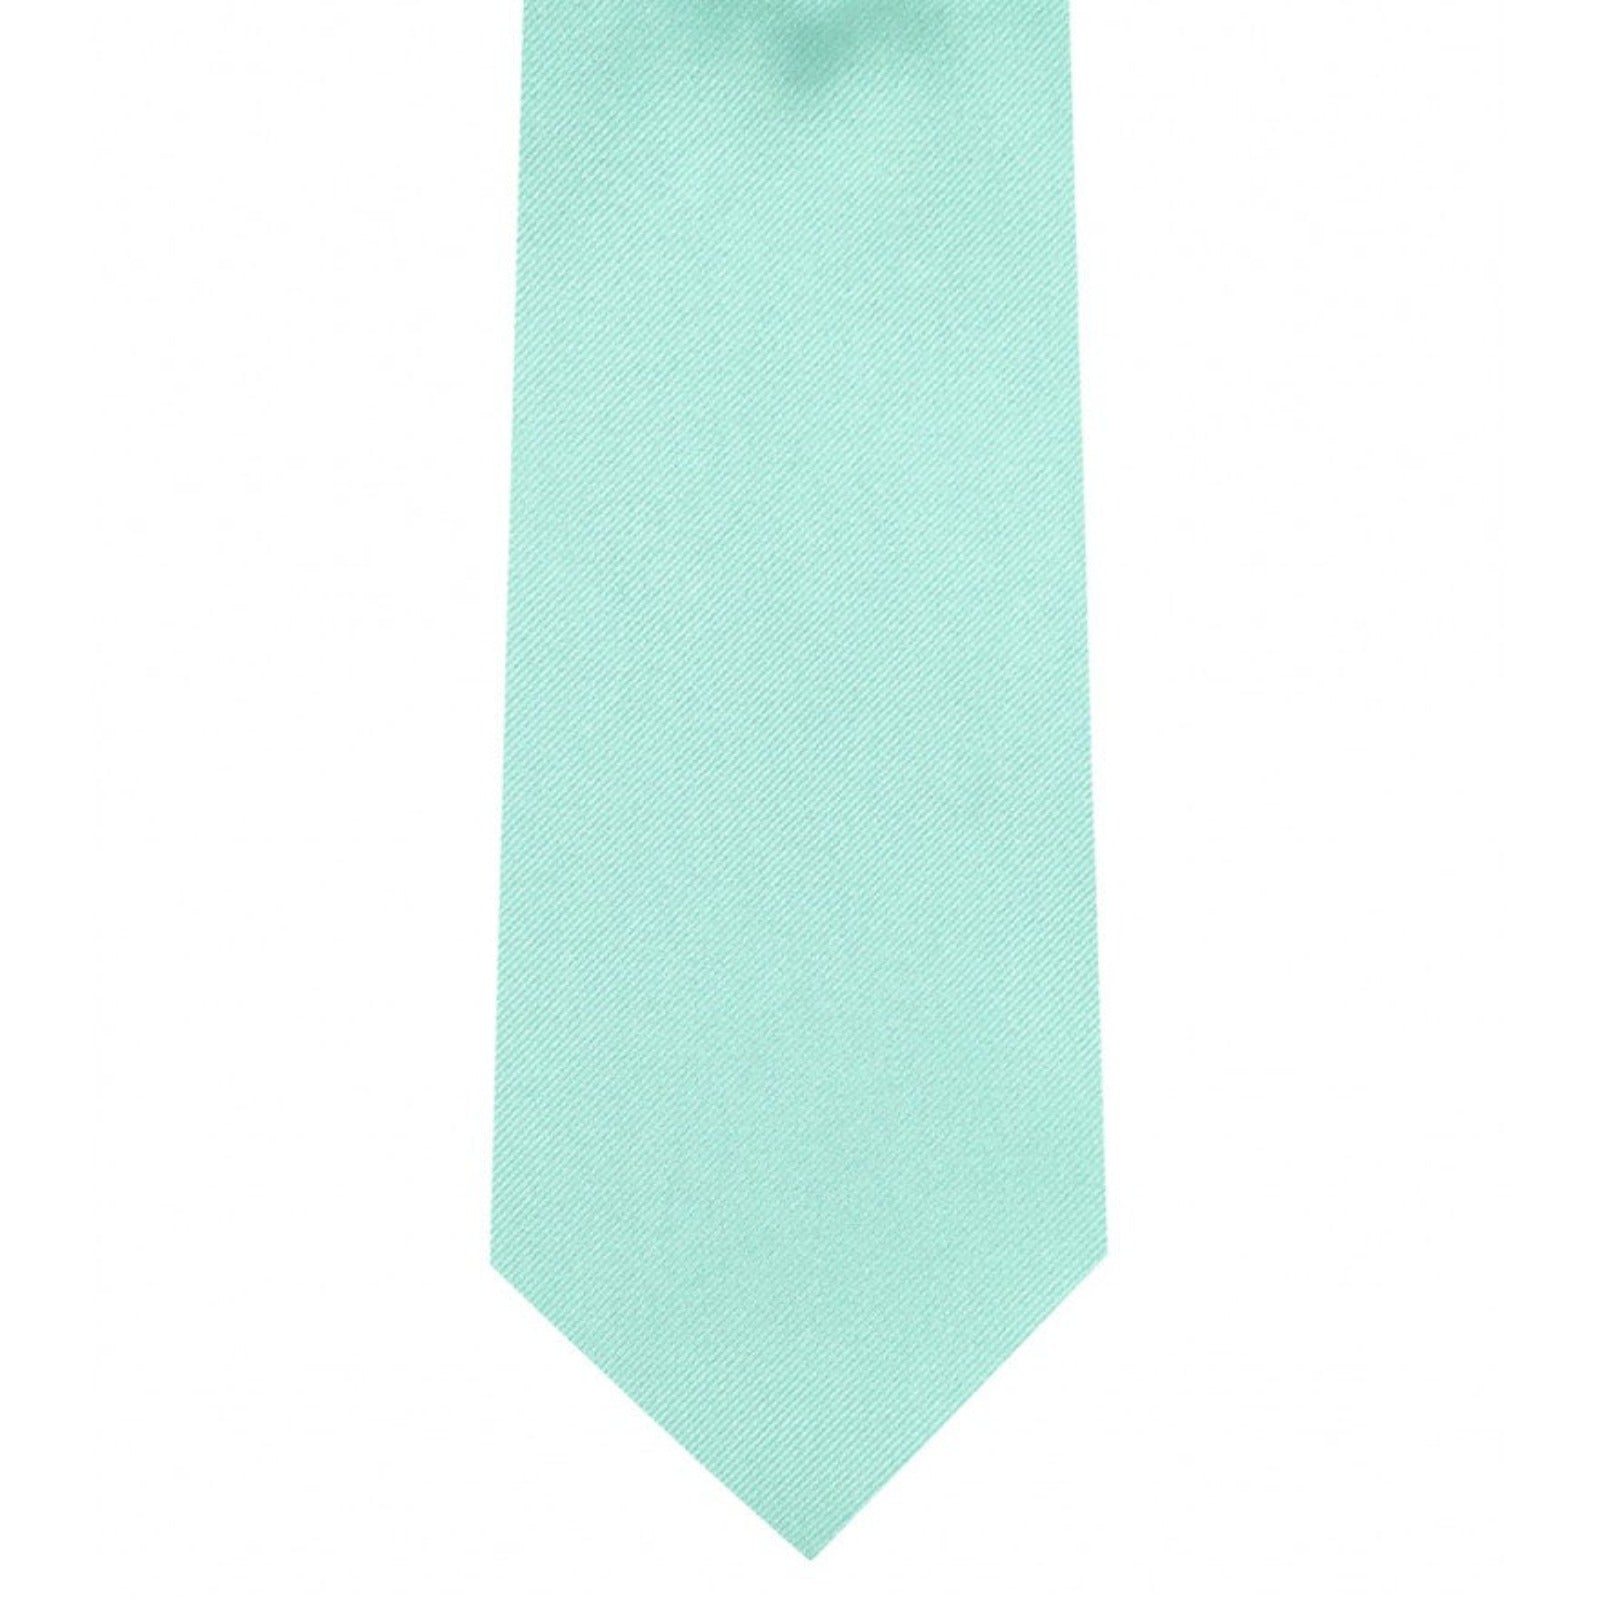 Classic Aqua Tie Ultra Skinny tie width 2.25 inches With Matching Pocket Square | KCT Menswear